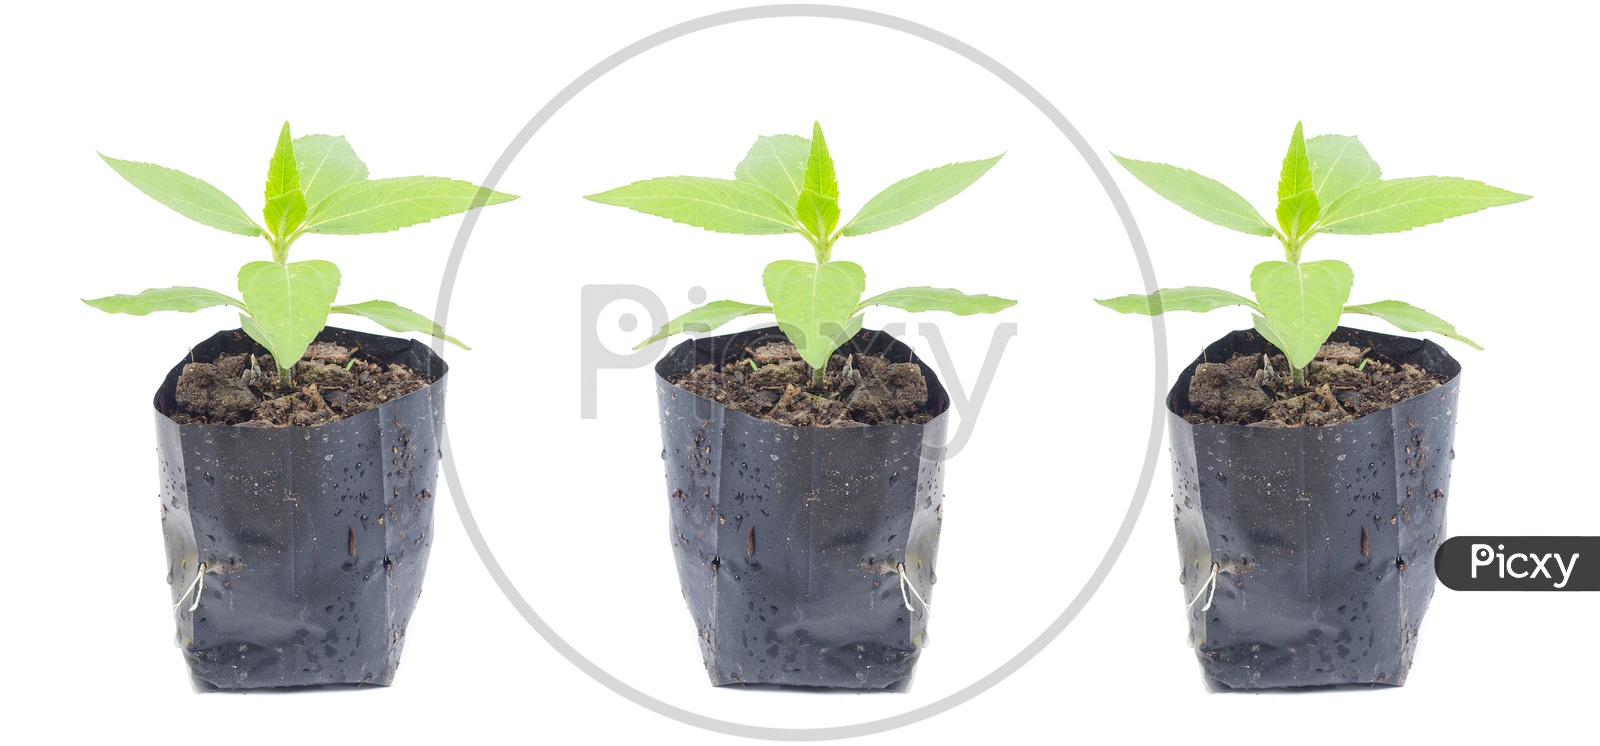 young plant Sapling Growing In a Plastic Pot isolated on white background